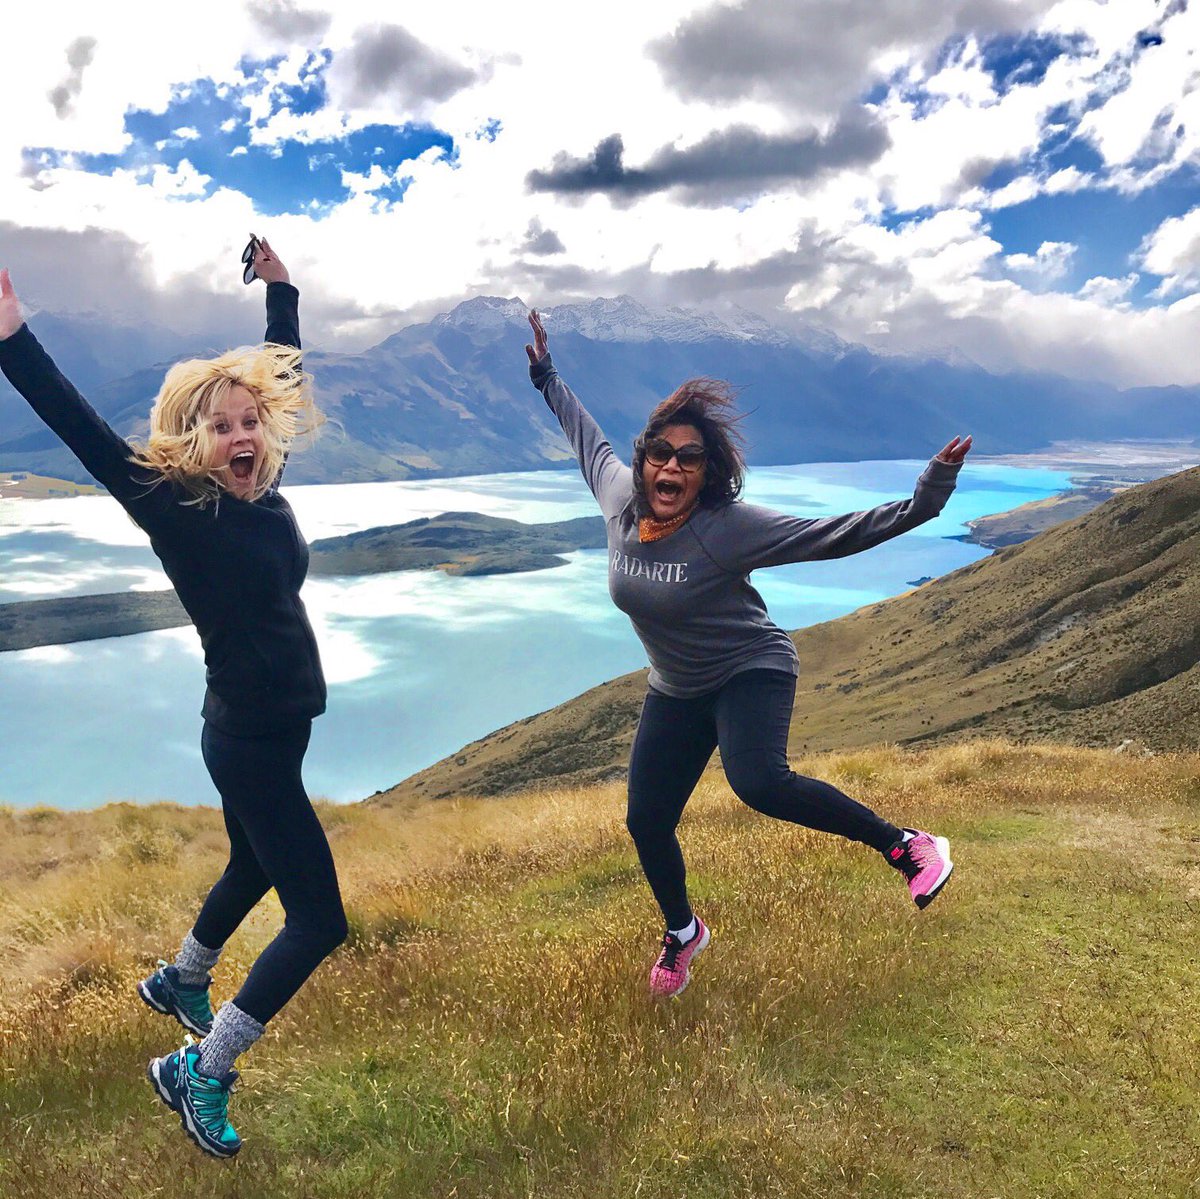 Couldn't be more excited to discover #NewZealand with this lady!!! ???????????? @mindykaling https://t.co/7fDOUTrajE